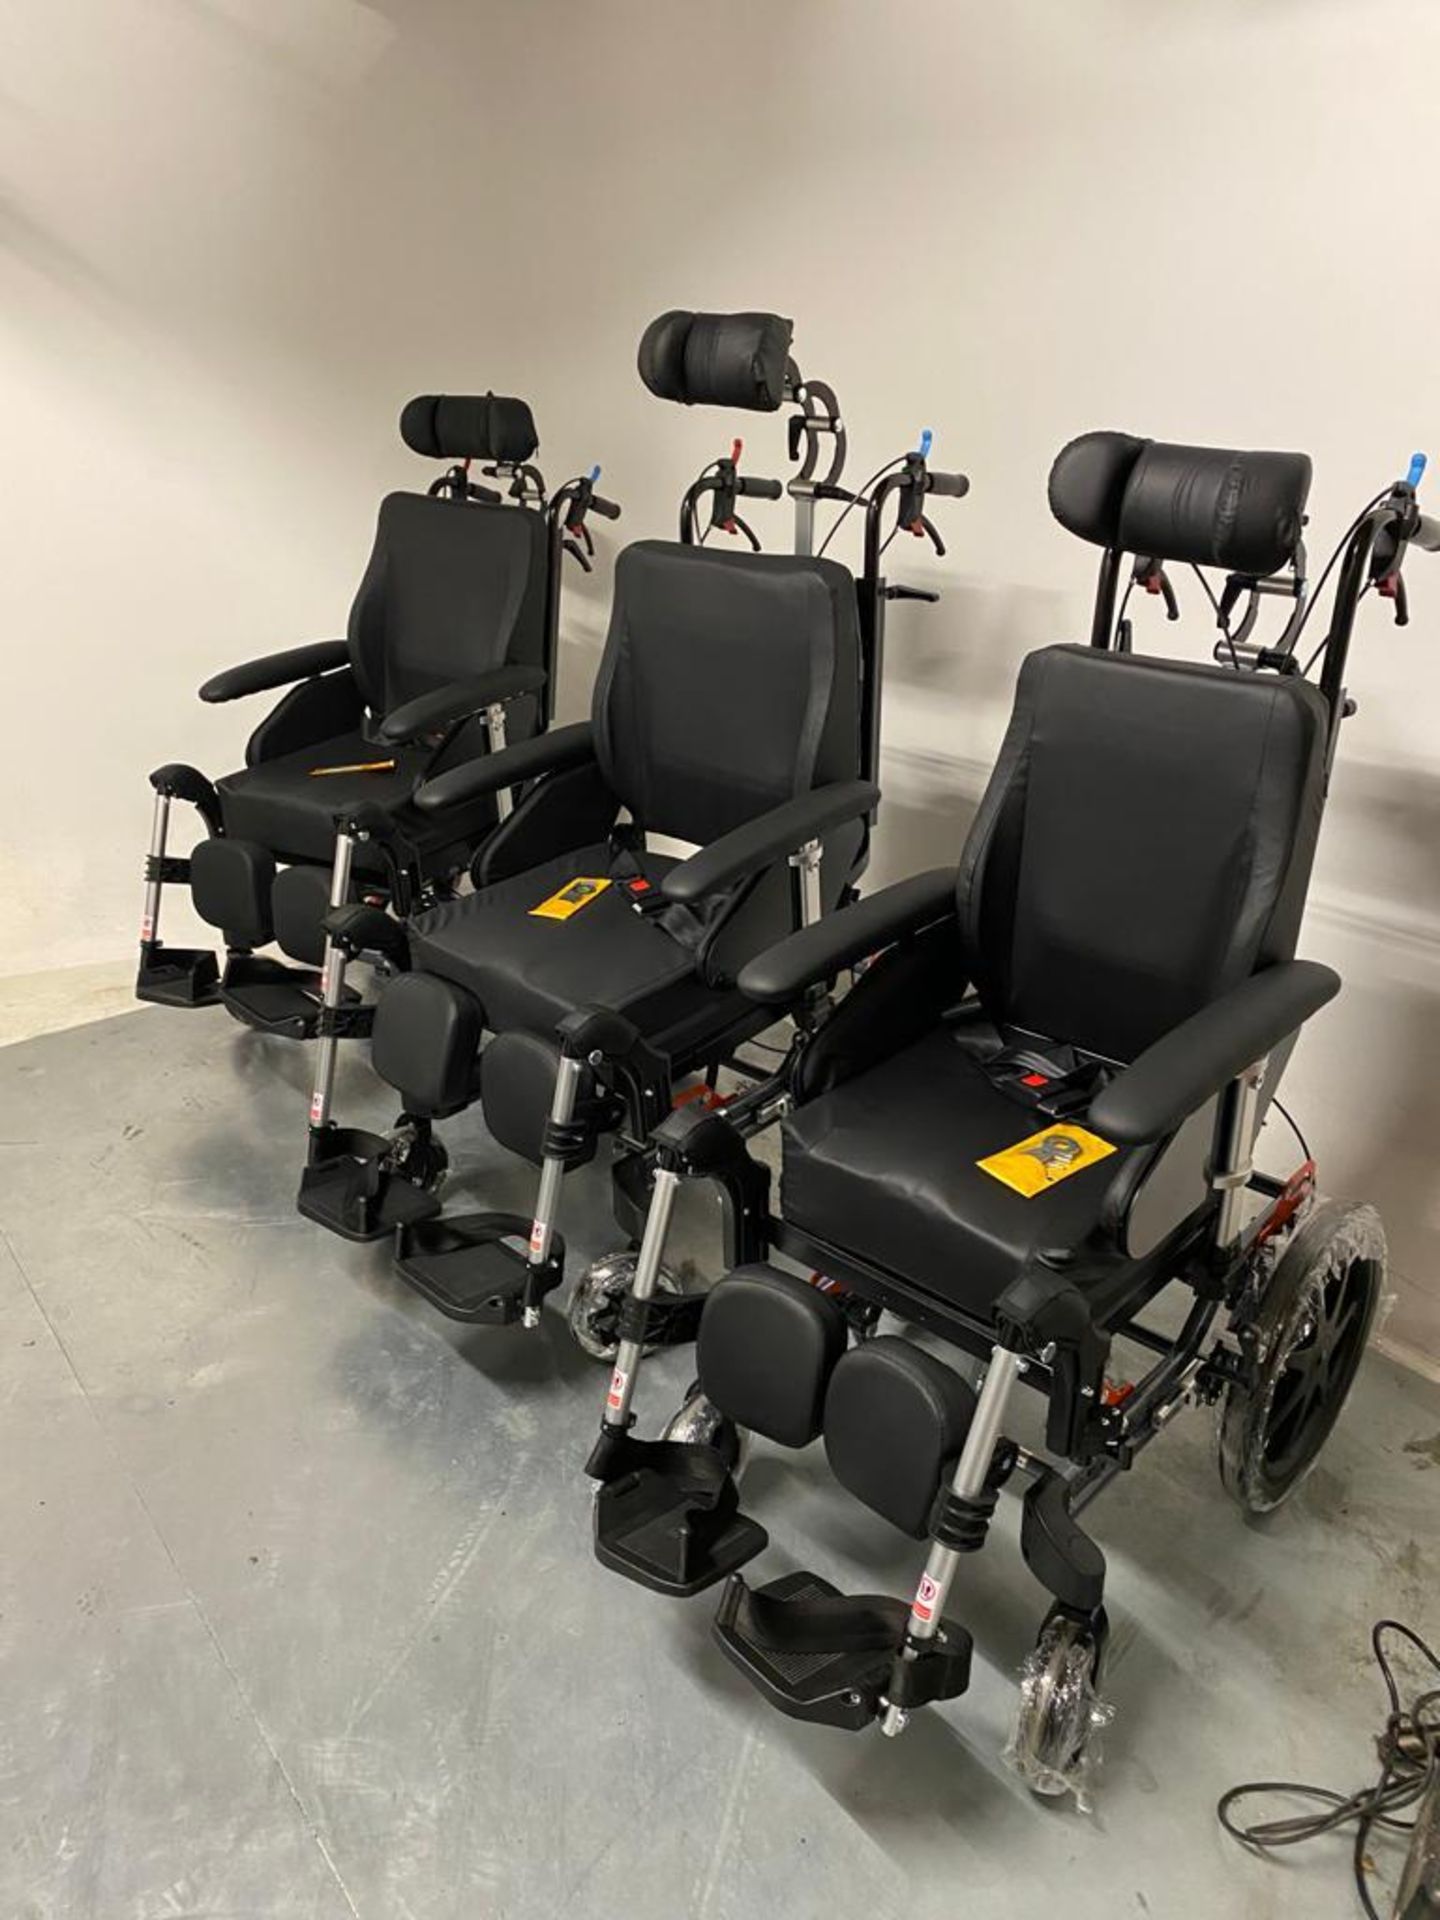 BRAND NEW SET OF 3 Gravity 2 Tilt in Space Wheel chairs SIZE S M L RRP £4500